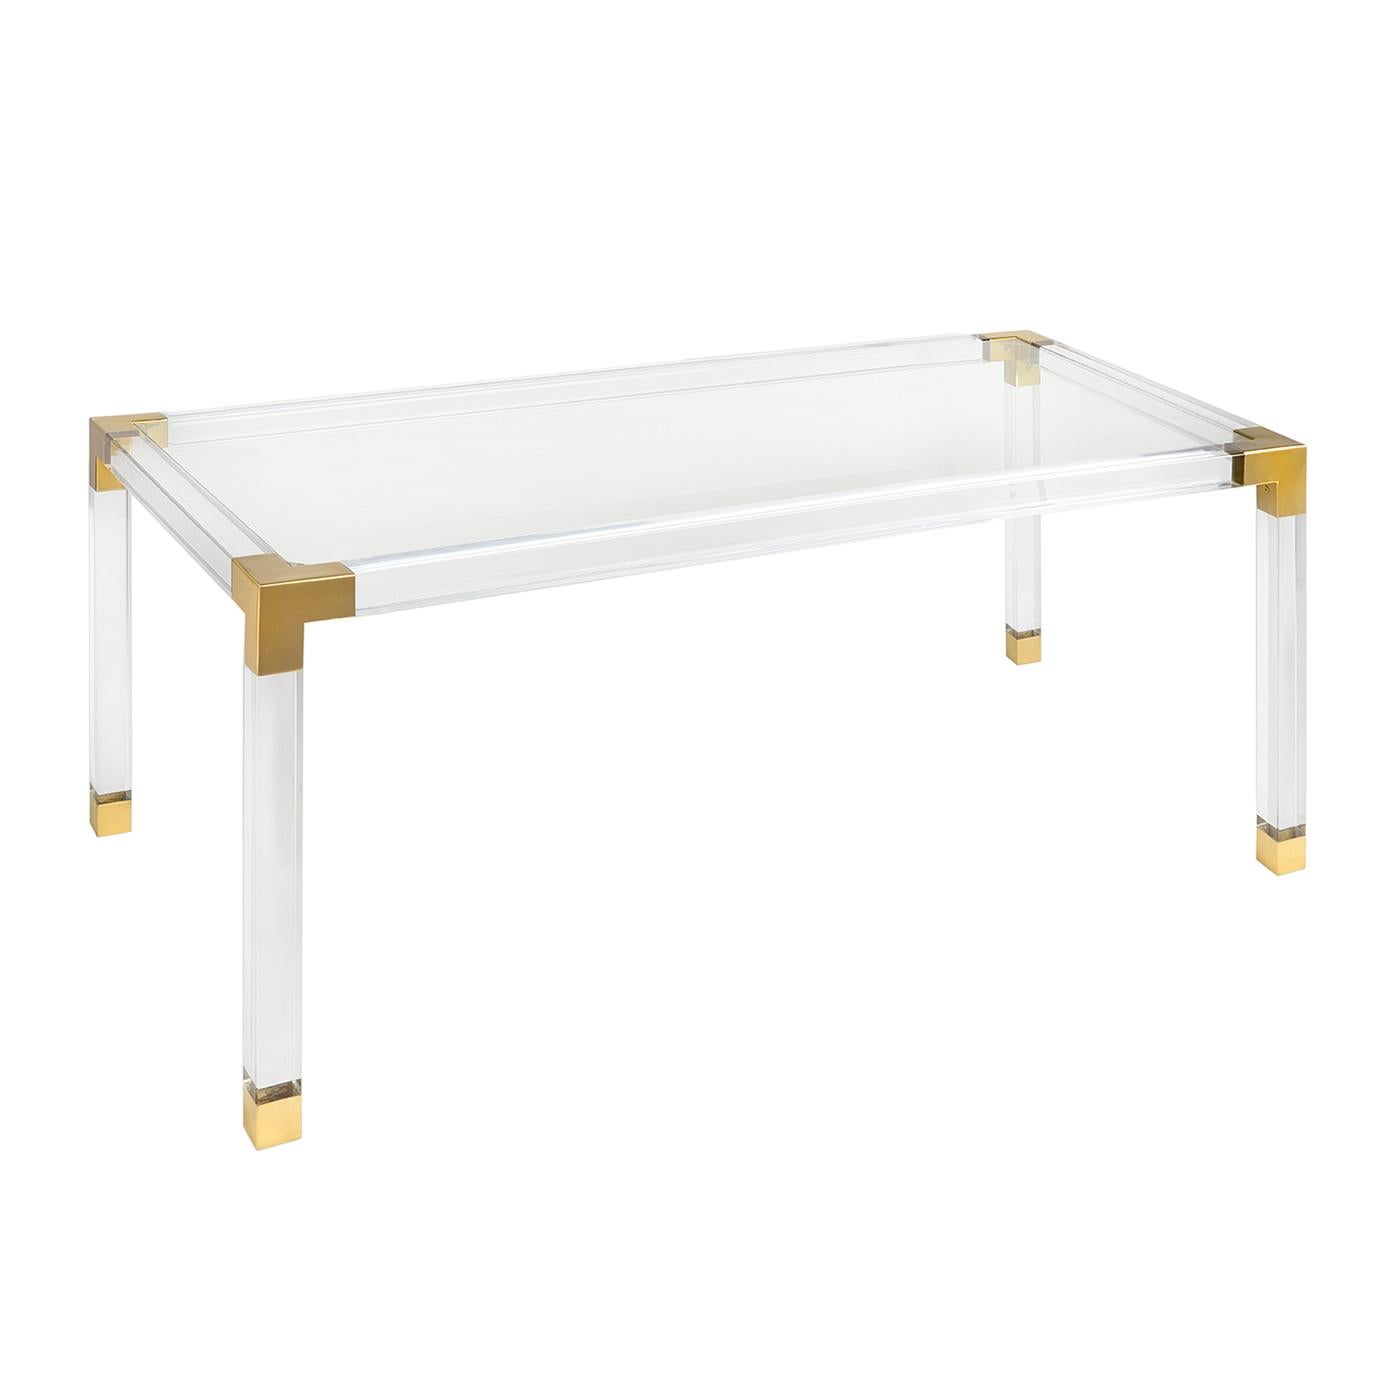 Clearly cool. Our Jacques collection is the perfect blend of simplicity and glamour, modern and traditional. Featuring luxe clear acrylic with brushed brass corners, our Jacques dining table seats up to six for a chic dining experience. Swag an